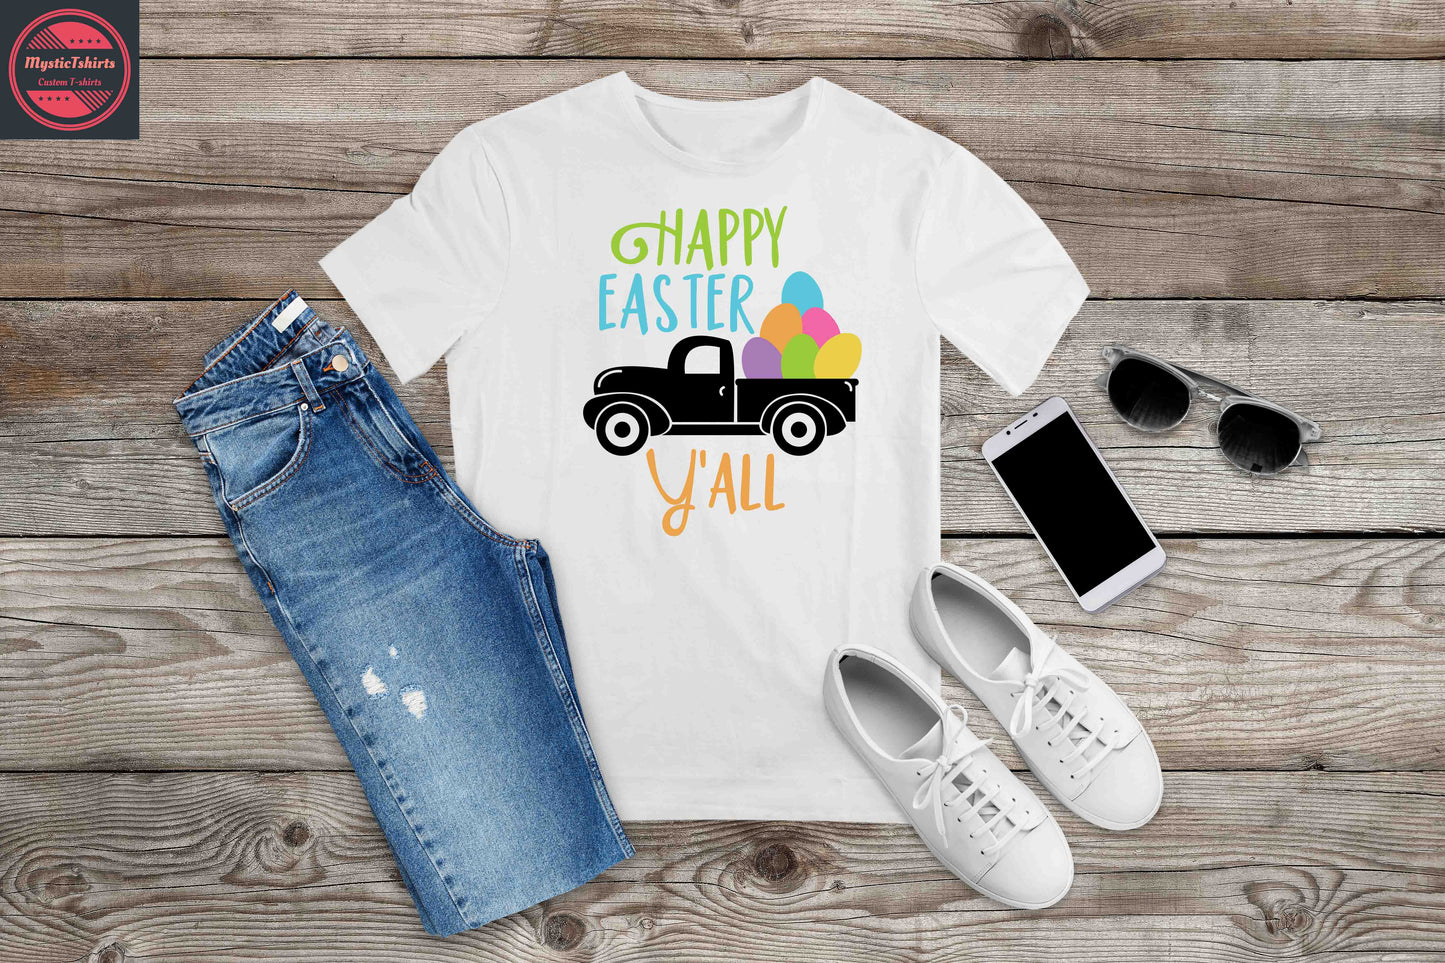 181. HAPPY EASTER Y'ALL, Custom Made Shirt, Personalized T-Shirt, Custom Text, Make Your Own Shirt, Custom Tee